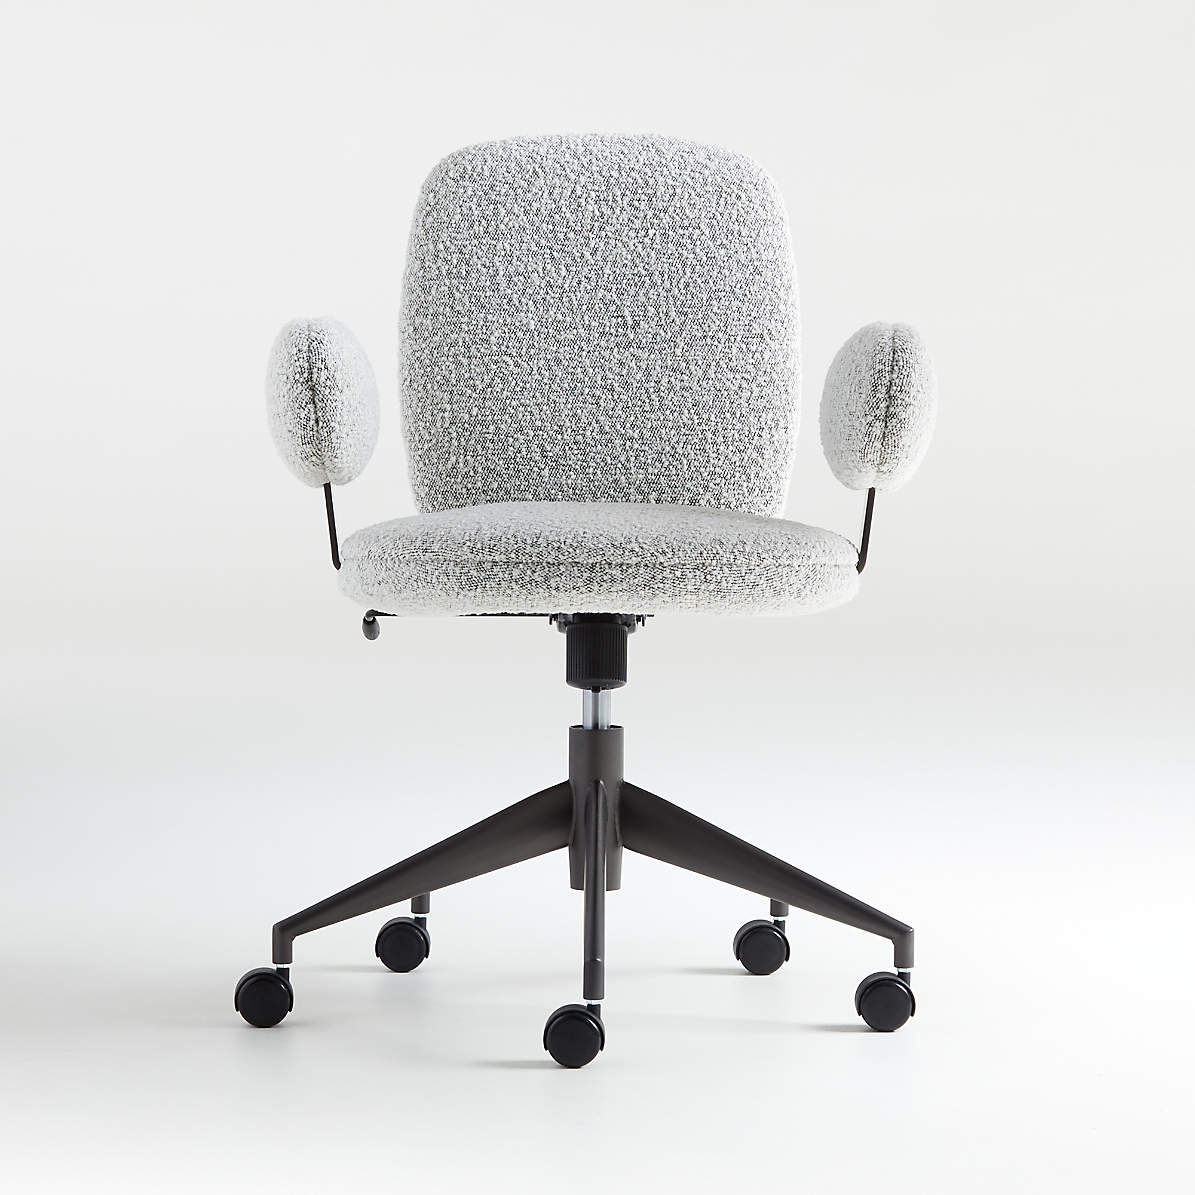 Faro Grey Office Chair Crate Barrel, Crate And Barrel White Desk Chair